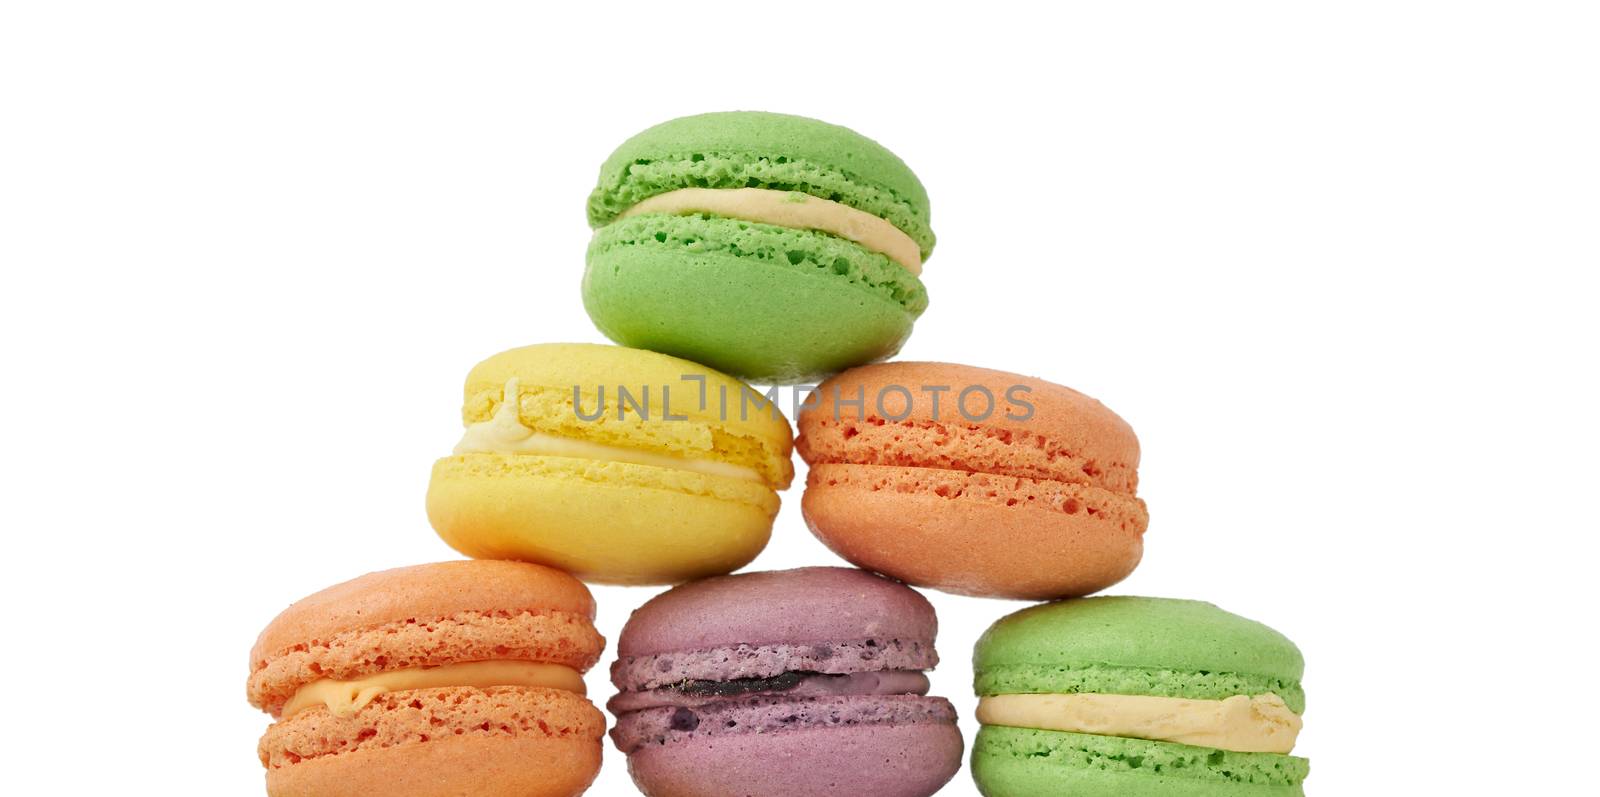 round baked multi-colored almond flour cakes macarons by ndanko